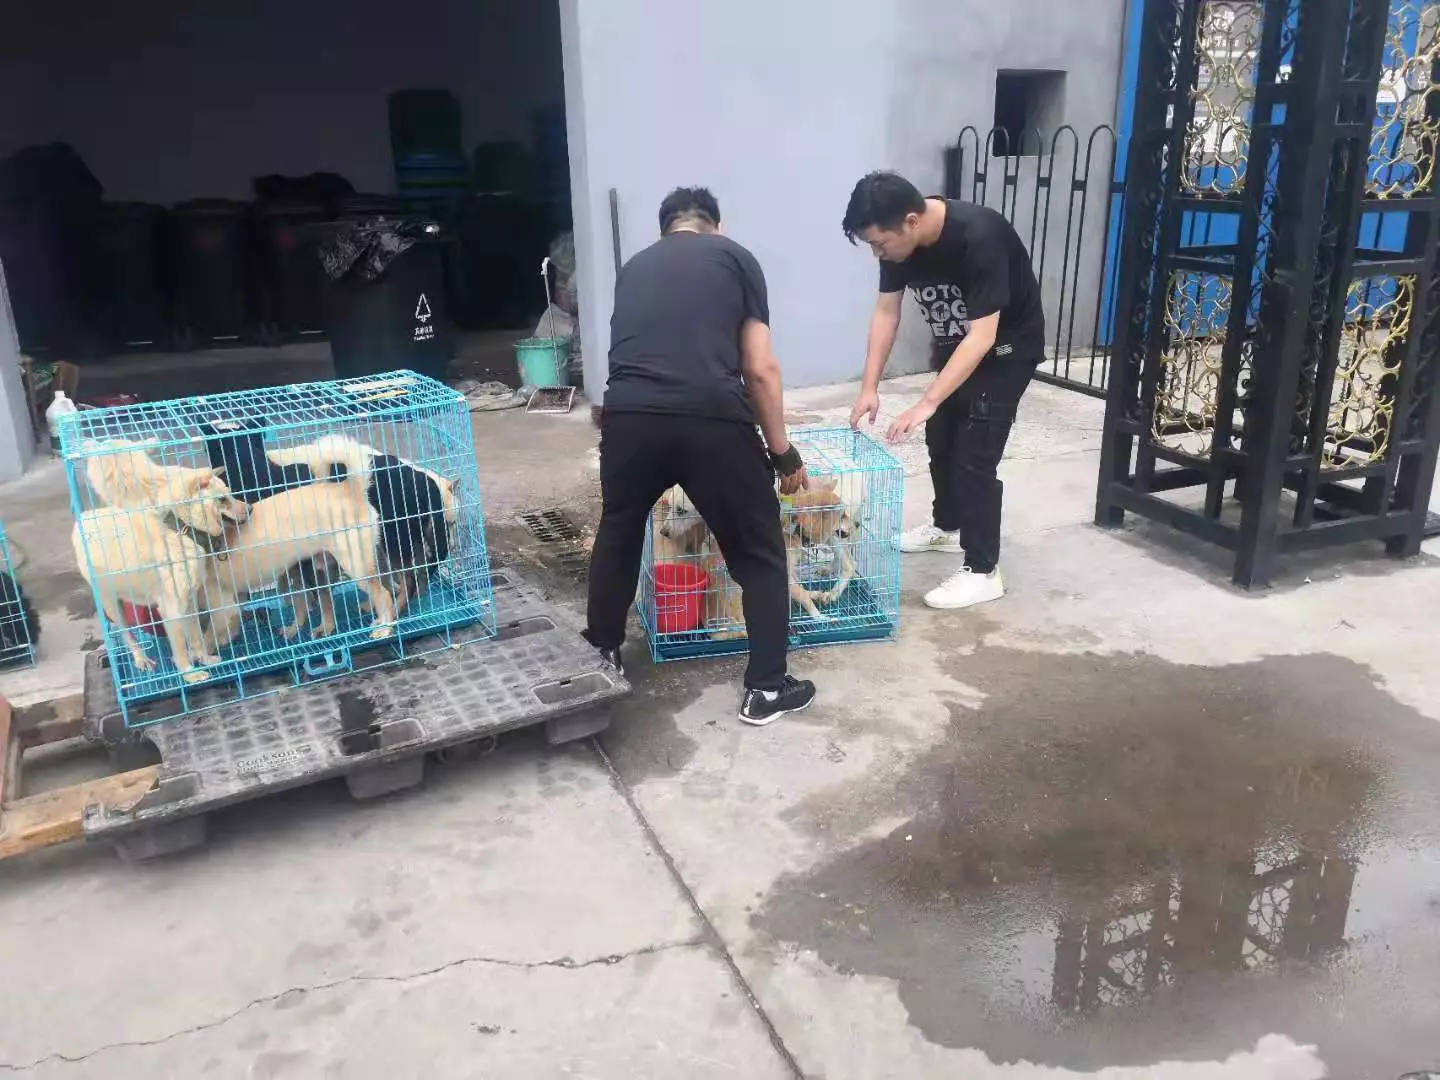 Volunteers on the ground rescuing the slaughterhouse pups (